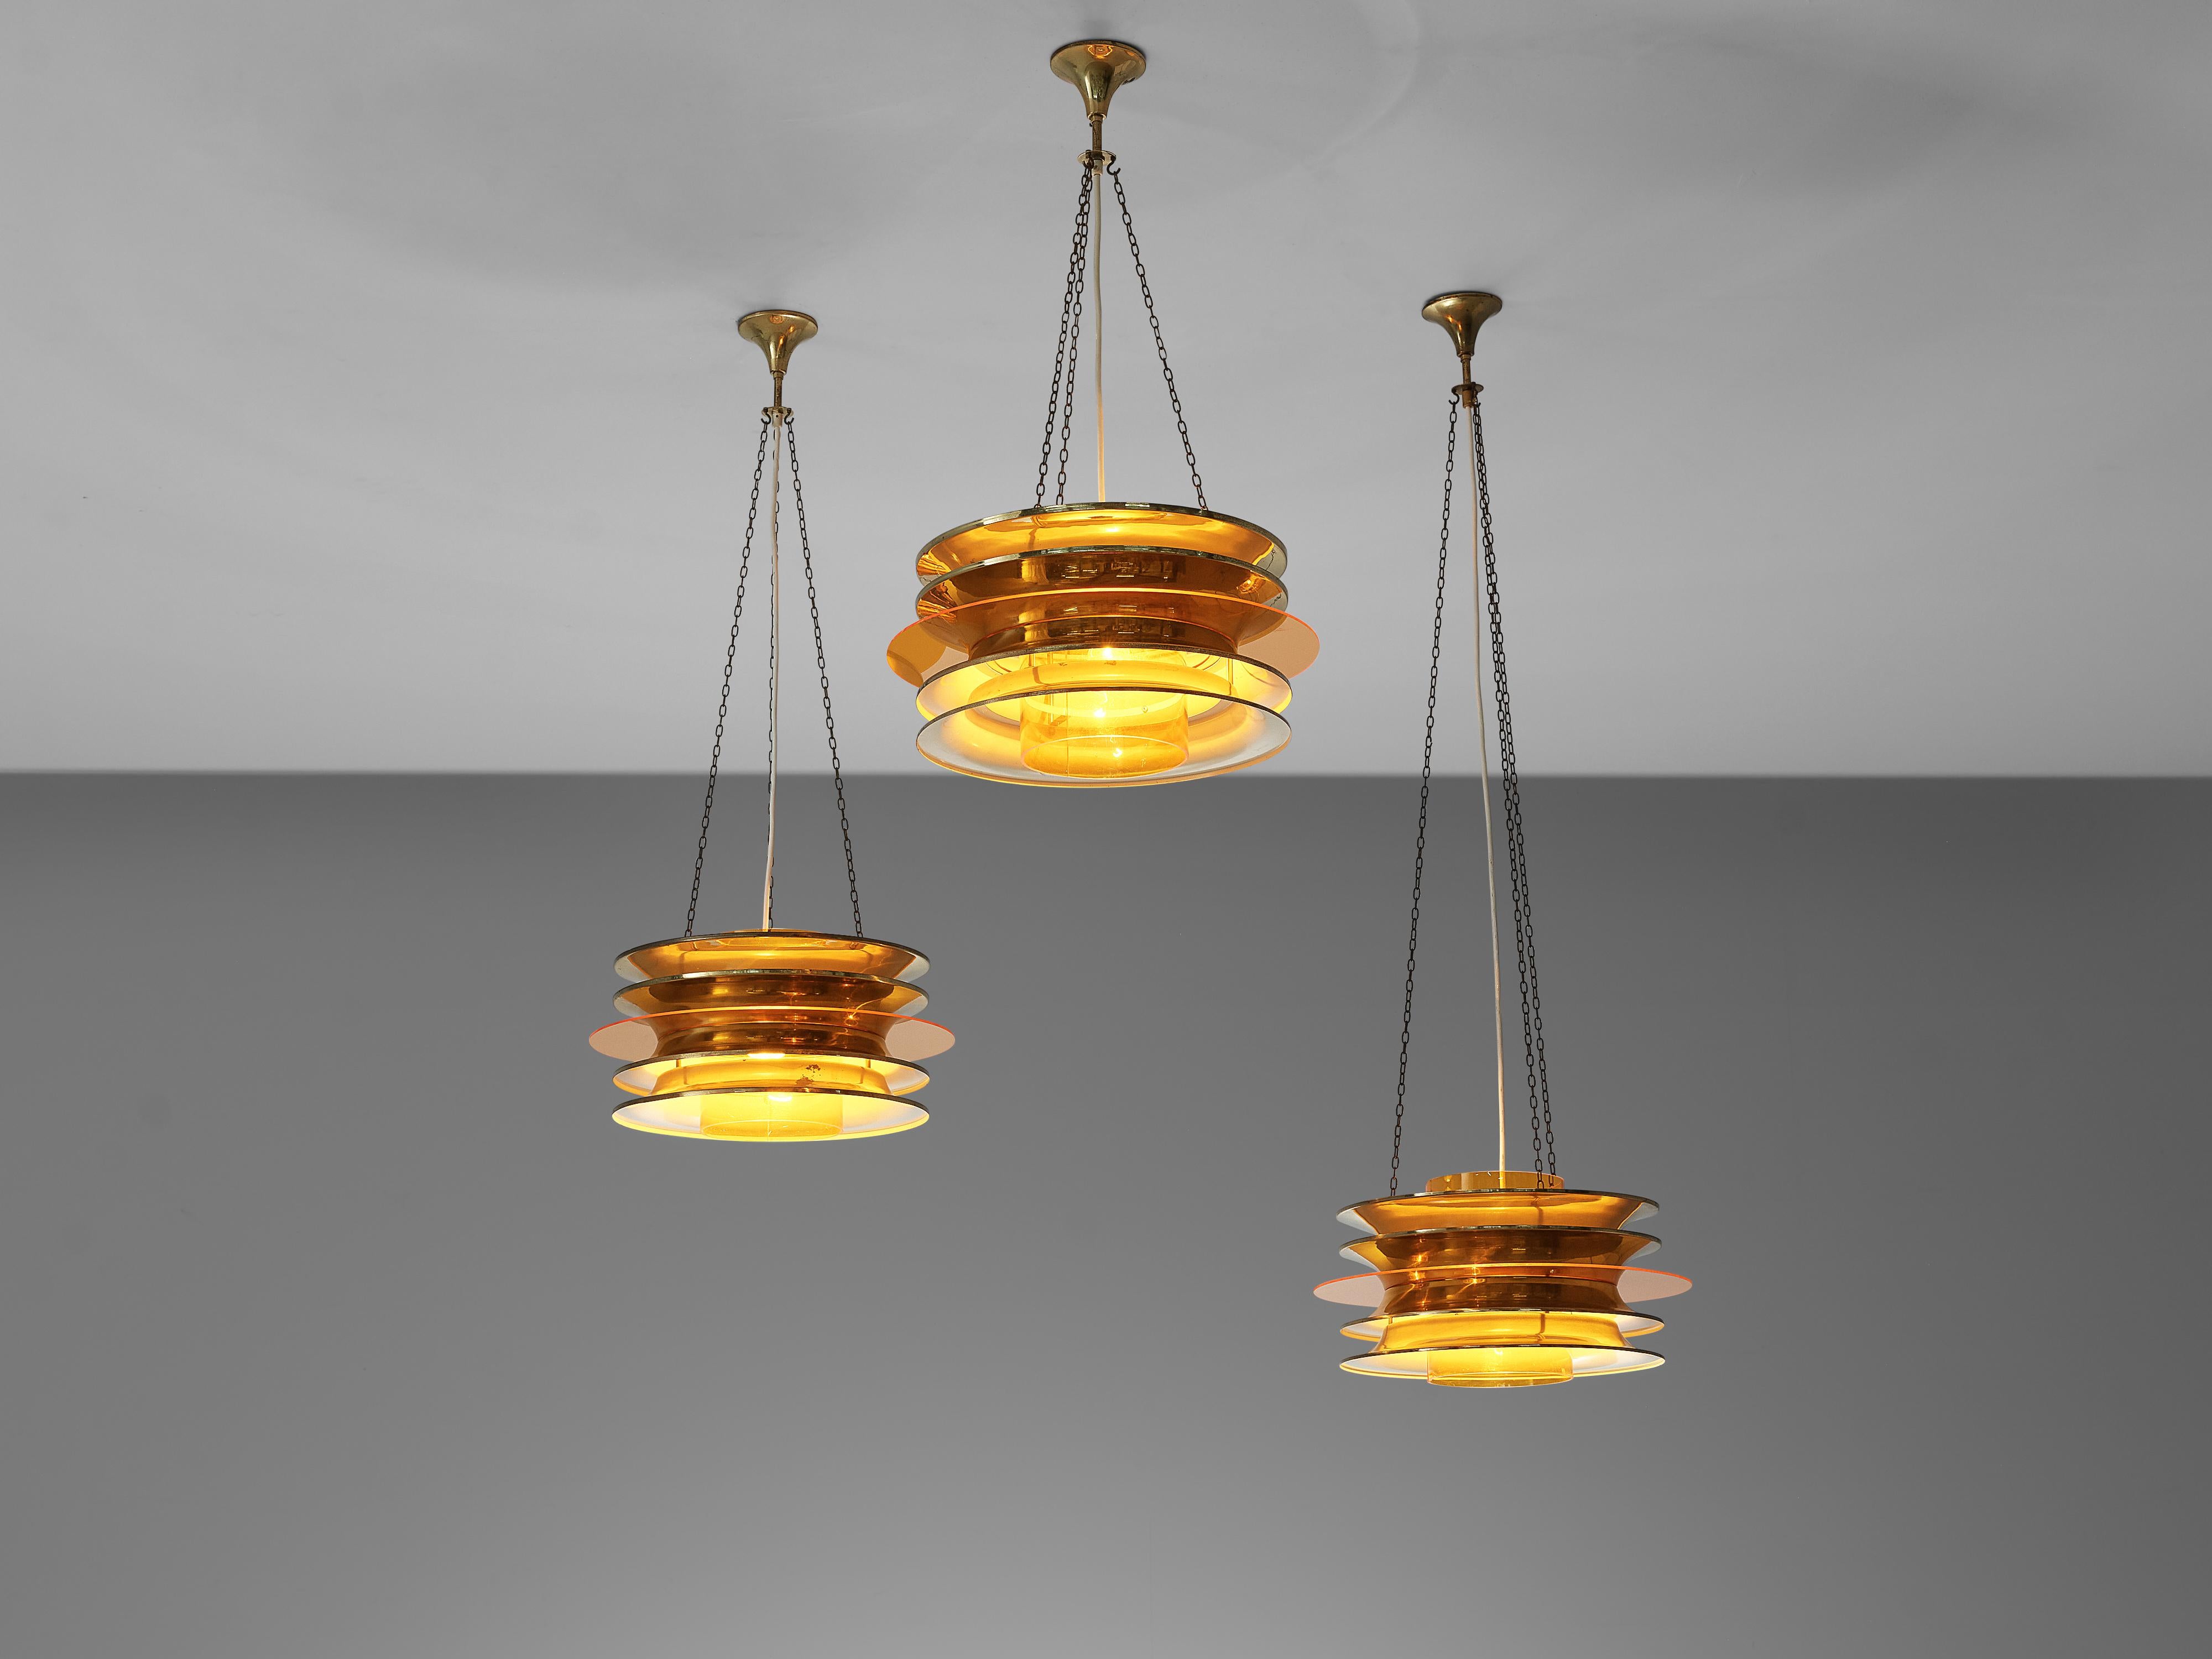 Kai Ruokonen for LYNX, chandelier, brass, orange acrylic, Finland, 1952

Kai Ruokonen is a Finnish designer that mostly works under the artist ‘Kai Finnmark’. This chandelier was designed for the Palace Hotel in Helsinki in 1952 and manufactured by